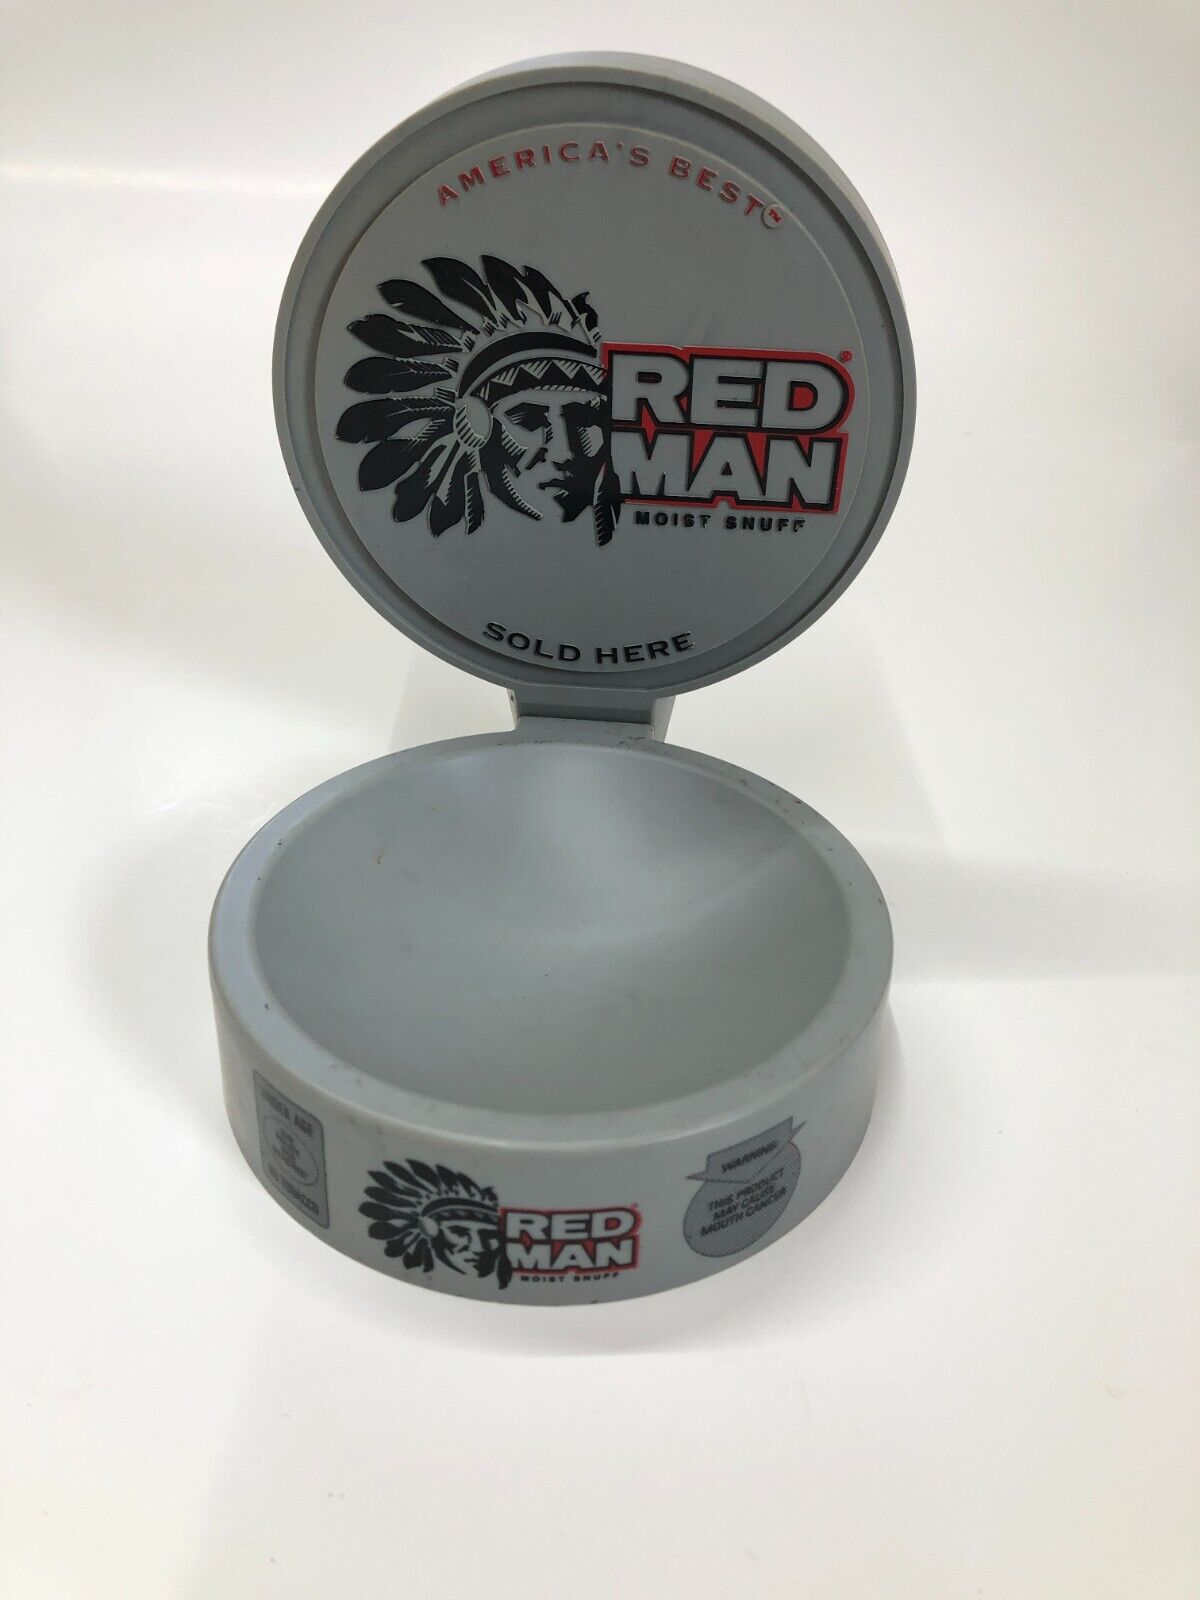 Red Man Moist Snuff American\'s Best     Counter Display